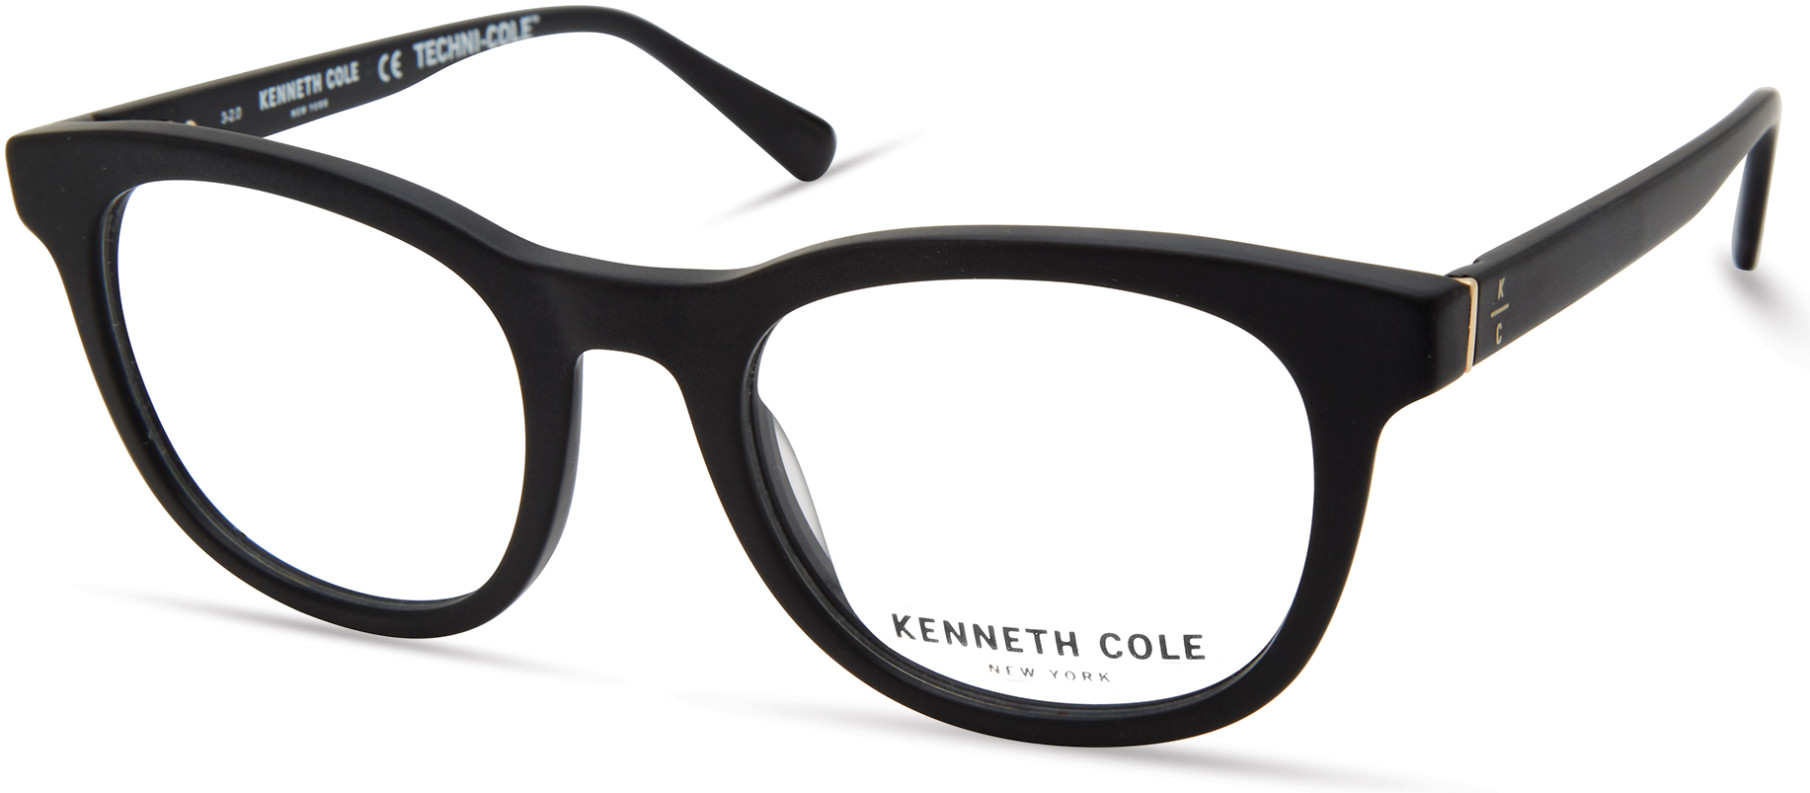 KENNETH COLE NY 0321